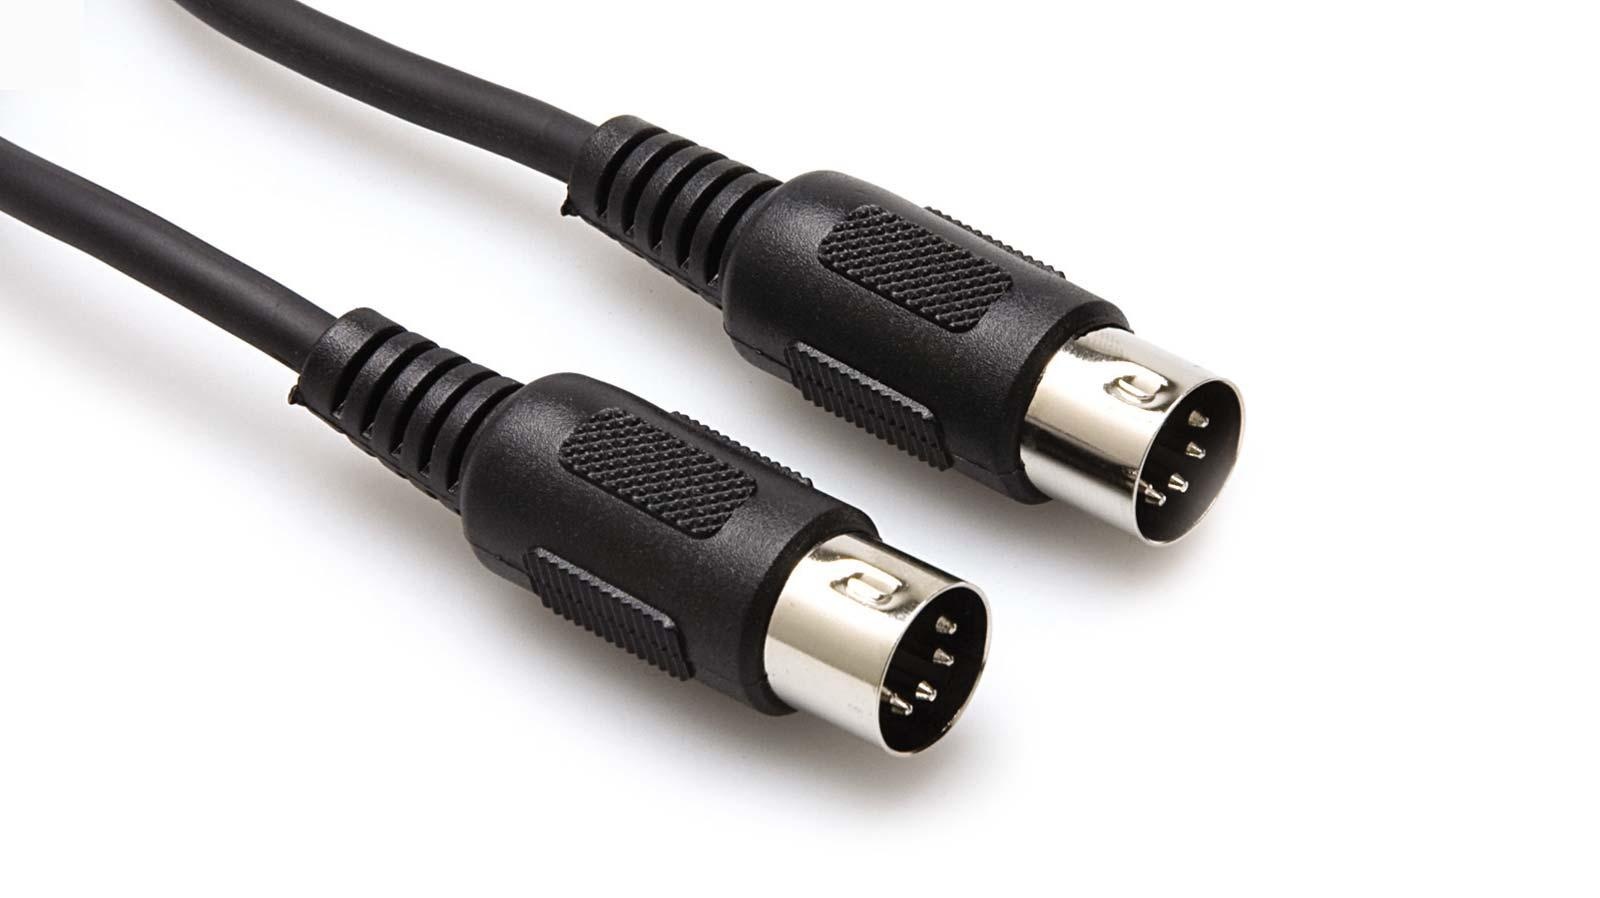 Hosa MID-303BK 5-Pin DIN to 5-Pin DIN MIDI Cable 3 Feet 